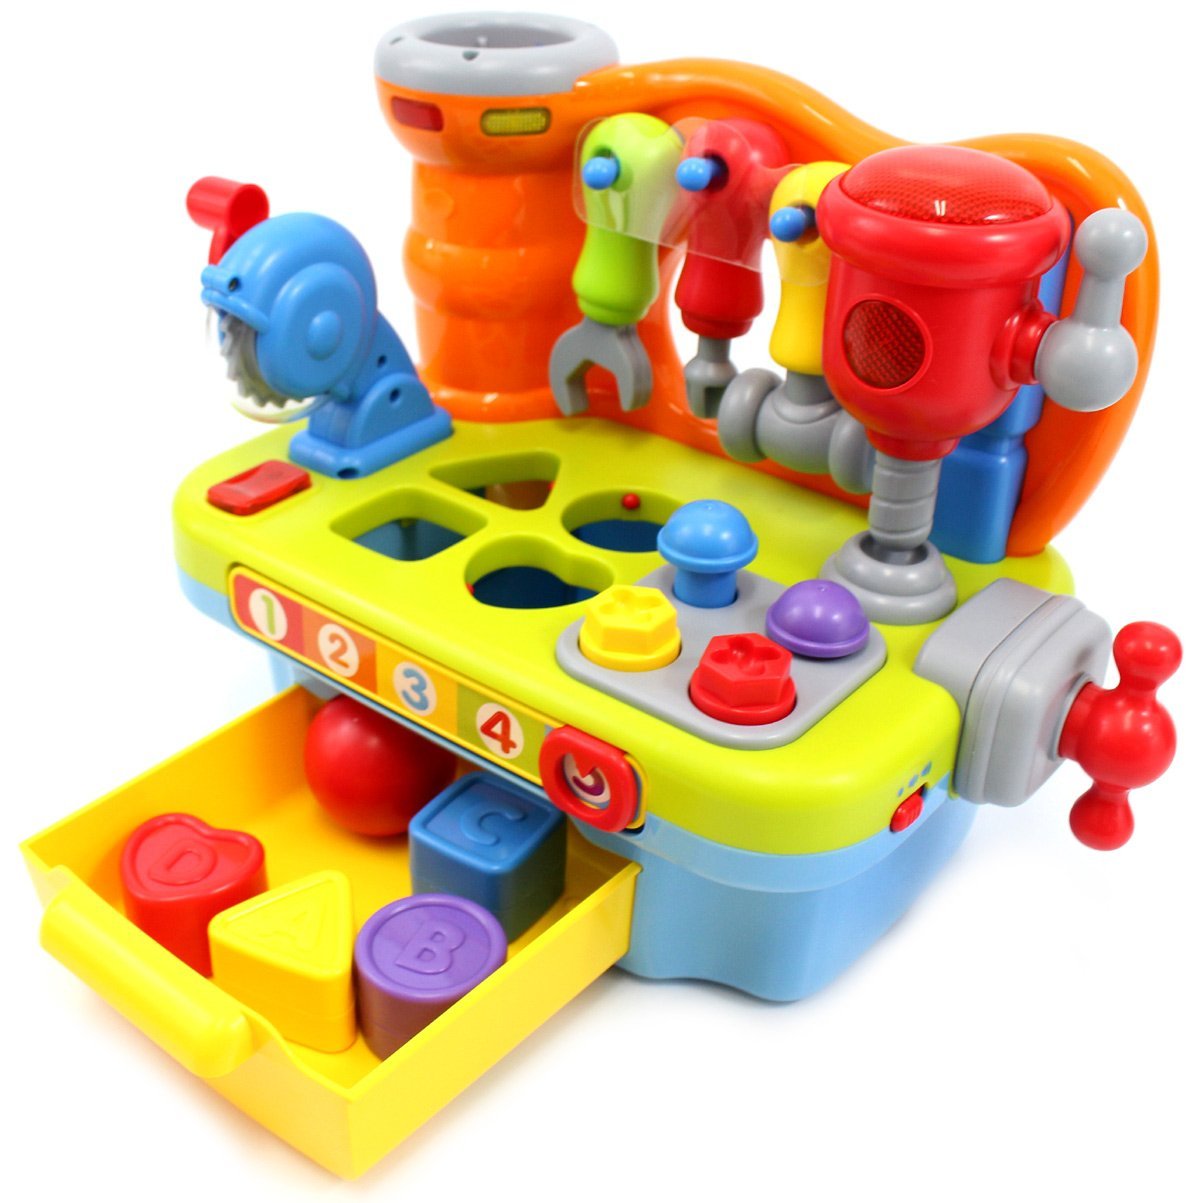 CifToys Musical Learning Workbench Toy 